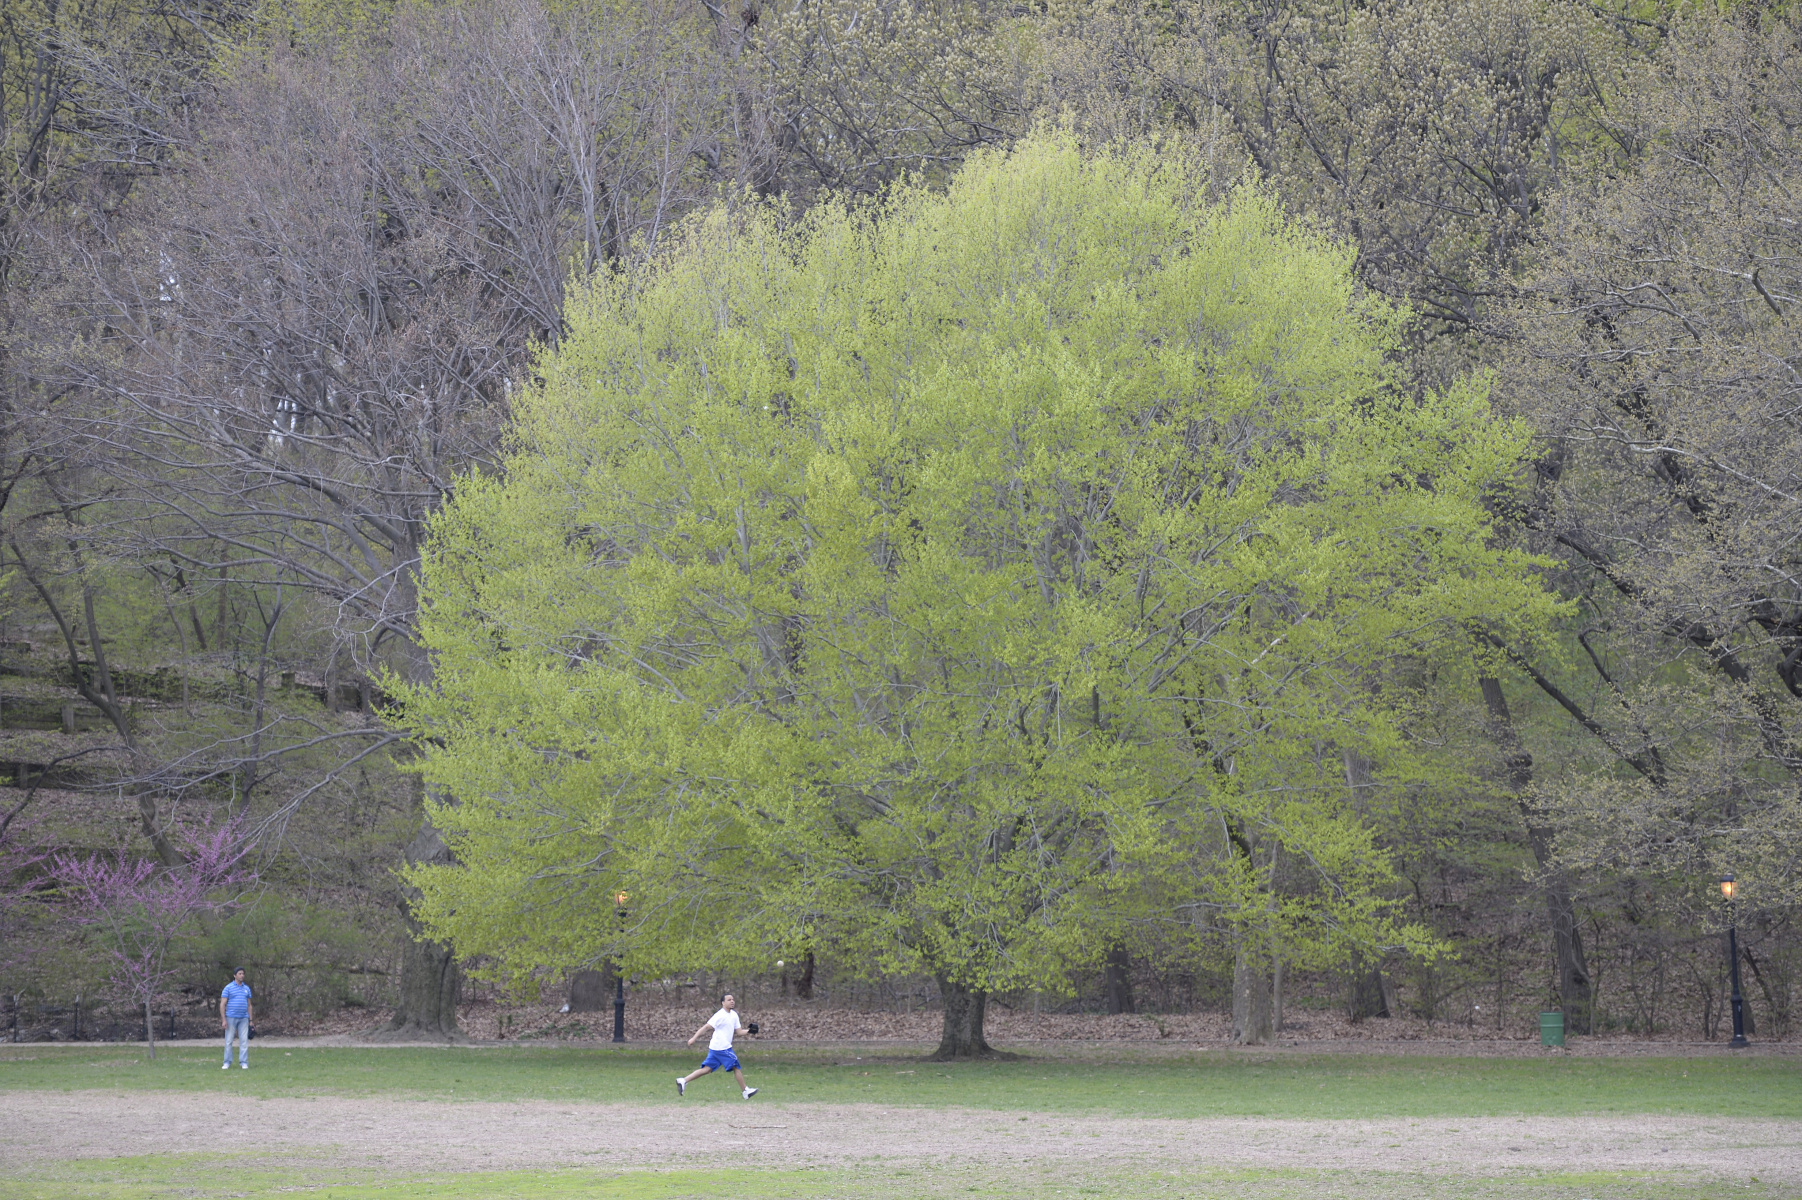 Inwood Hill Park, Manhattan : Parks and People : Photography by Adam Stoltman: Sports Photography, The Arts, Portraiture, Travel, Photojournalism and Fine Art in New York